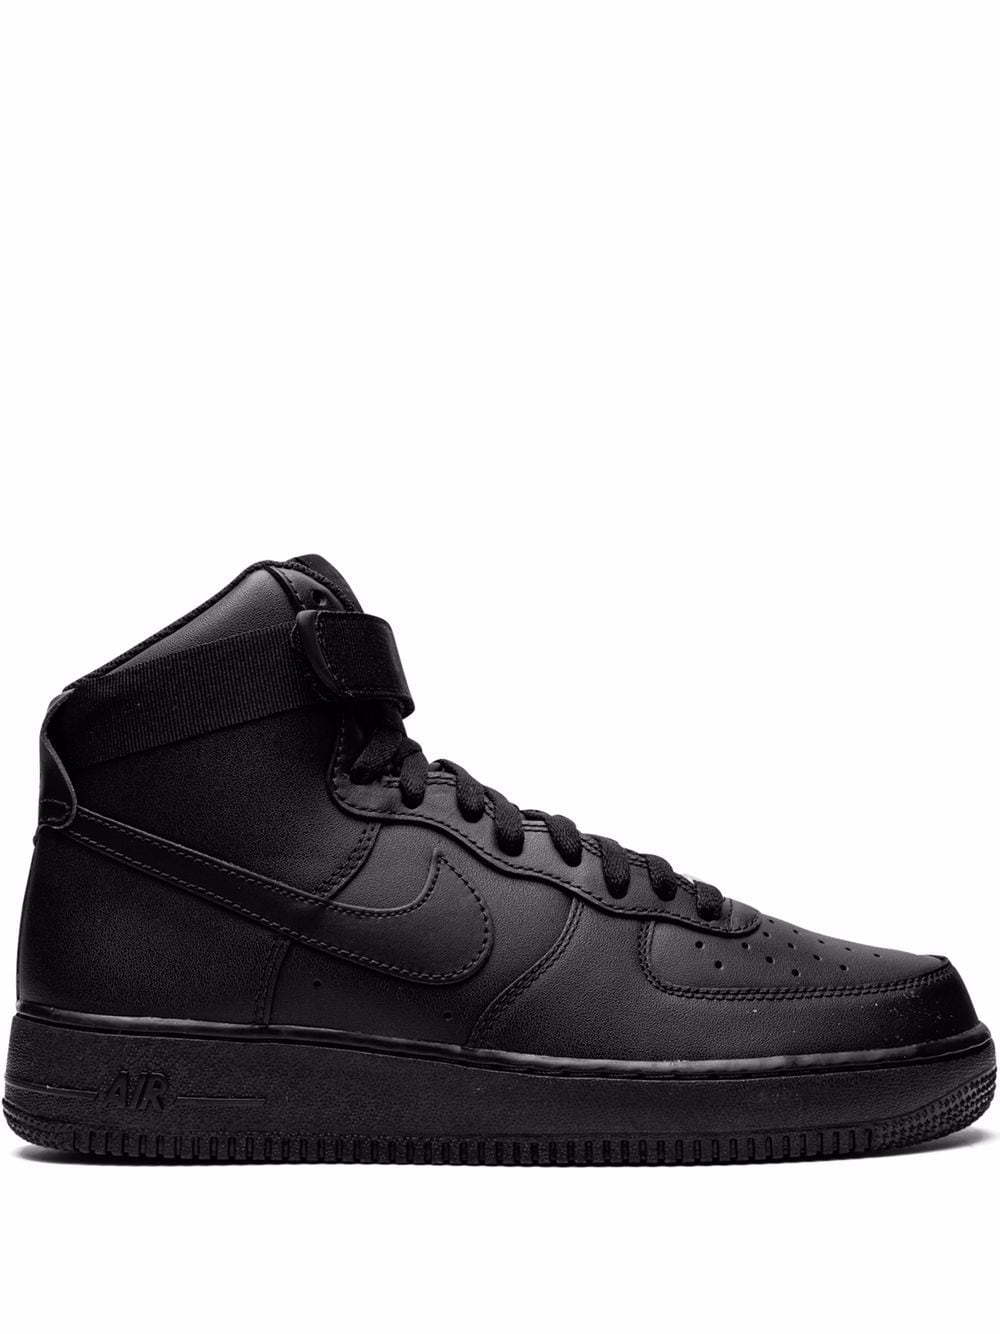 AIR FORCE 1 HIGH '07 SNEAKERS